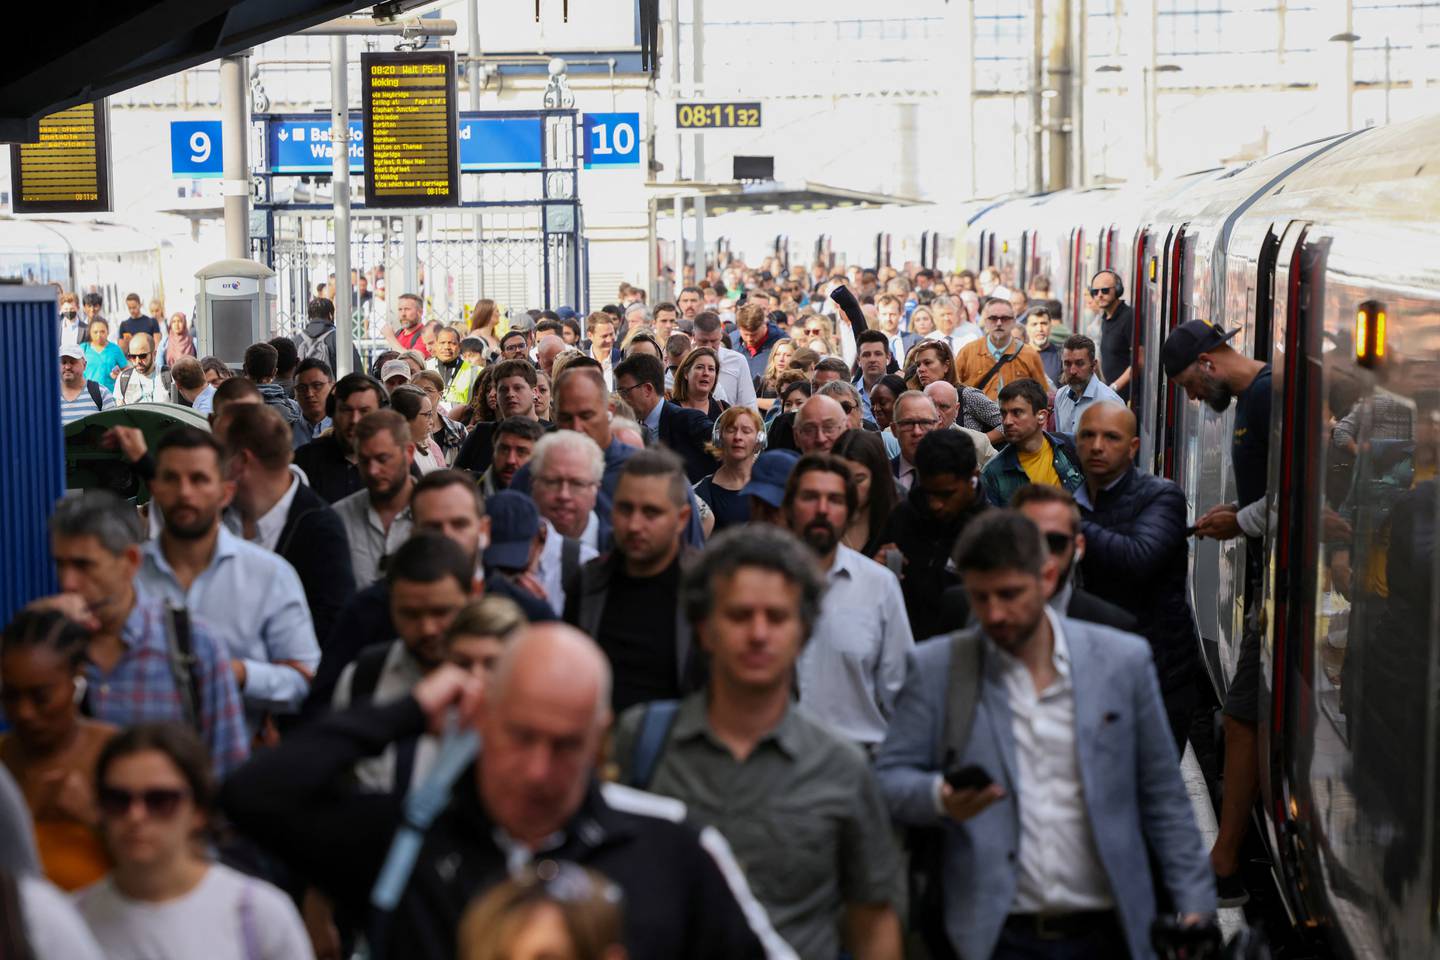 Crowds of passengers get off a train at Waterloo Station in central London. Reuters